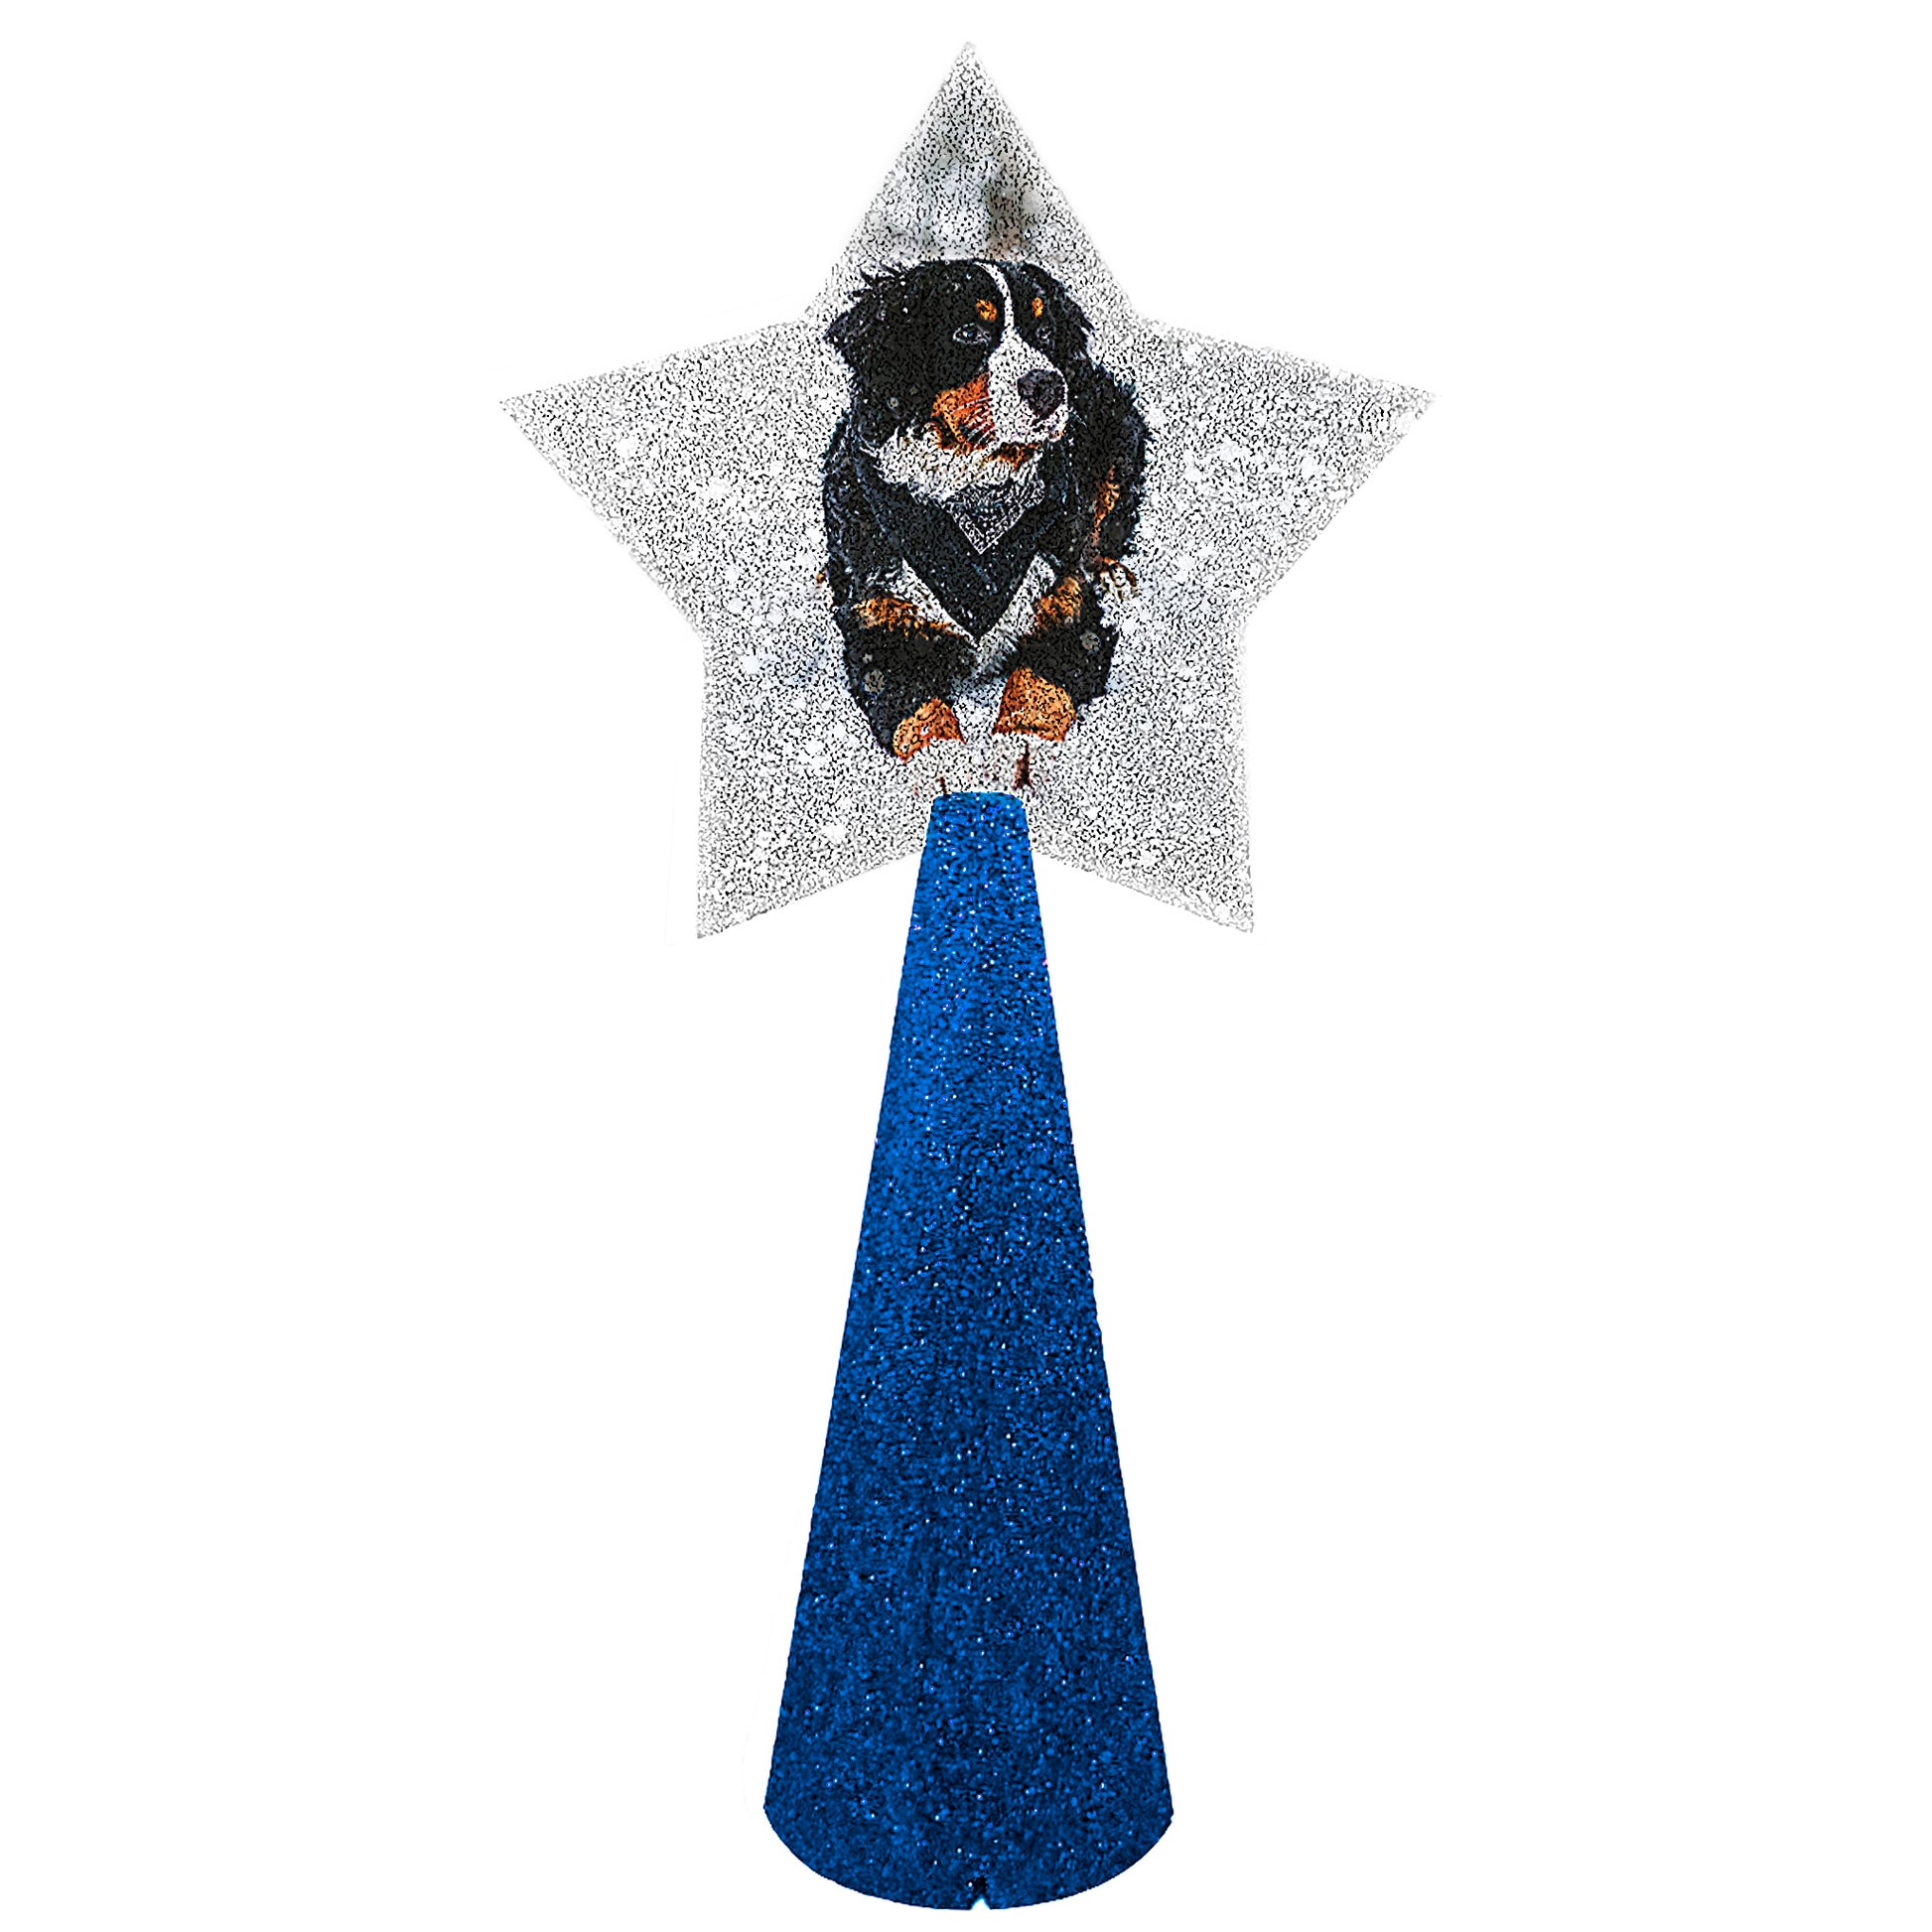 Custom tree topper with sample dog image on royal blue glitter cone - double-sided back